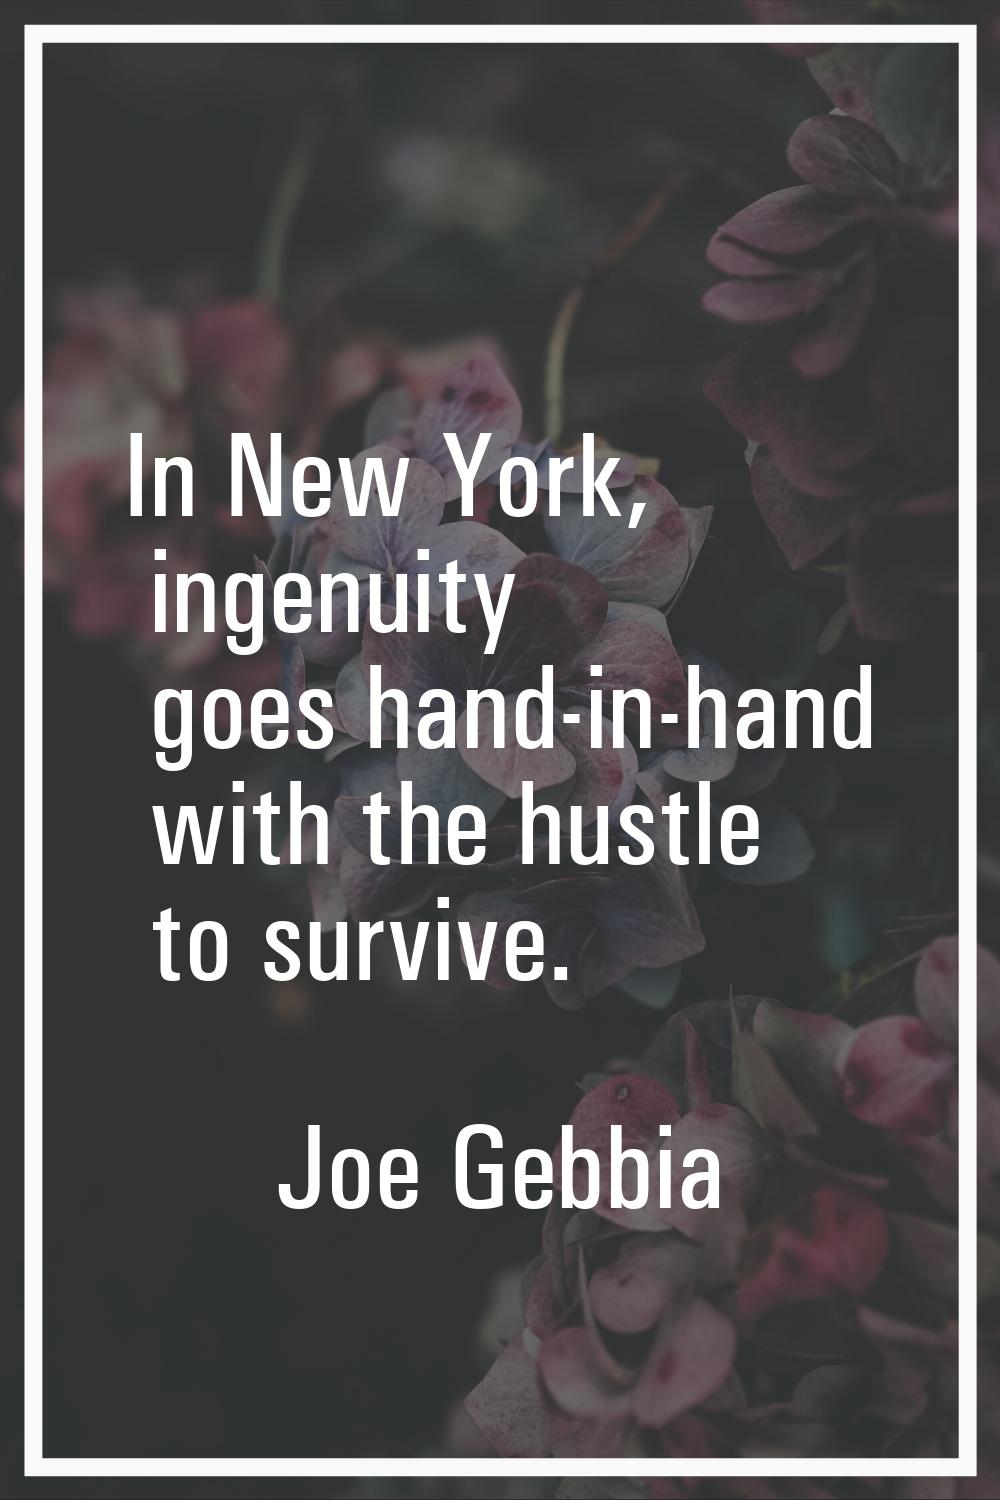 In New York, ingenuity goes hand-in-hand with the hustle to survive.